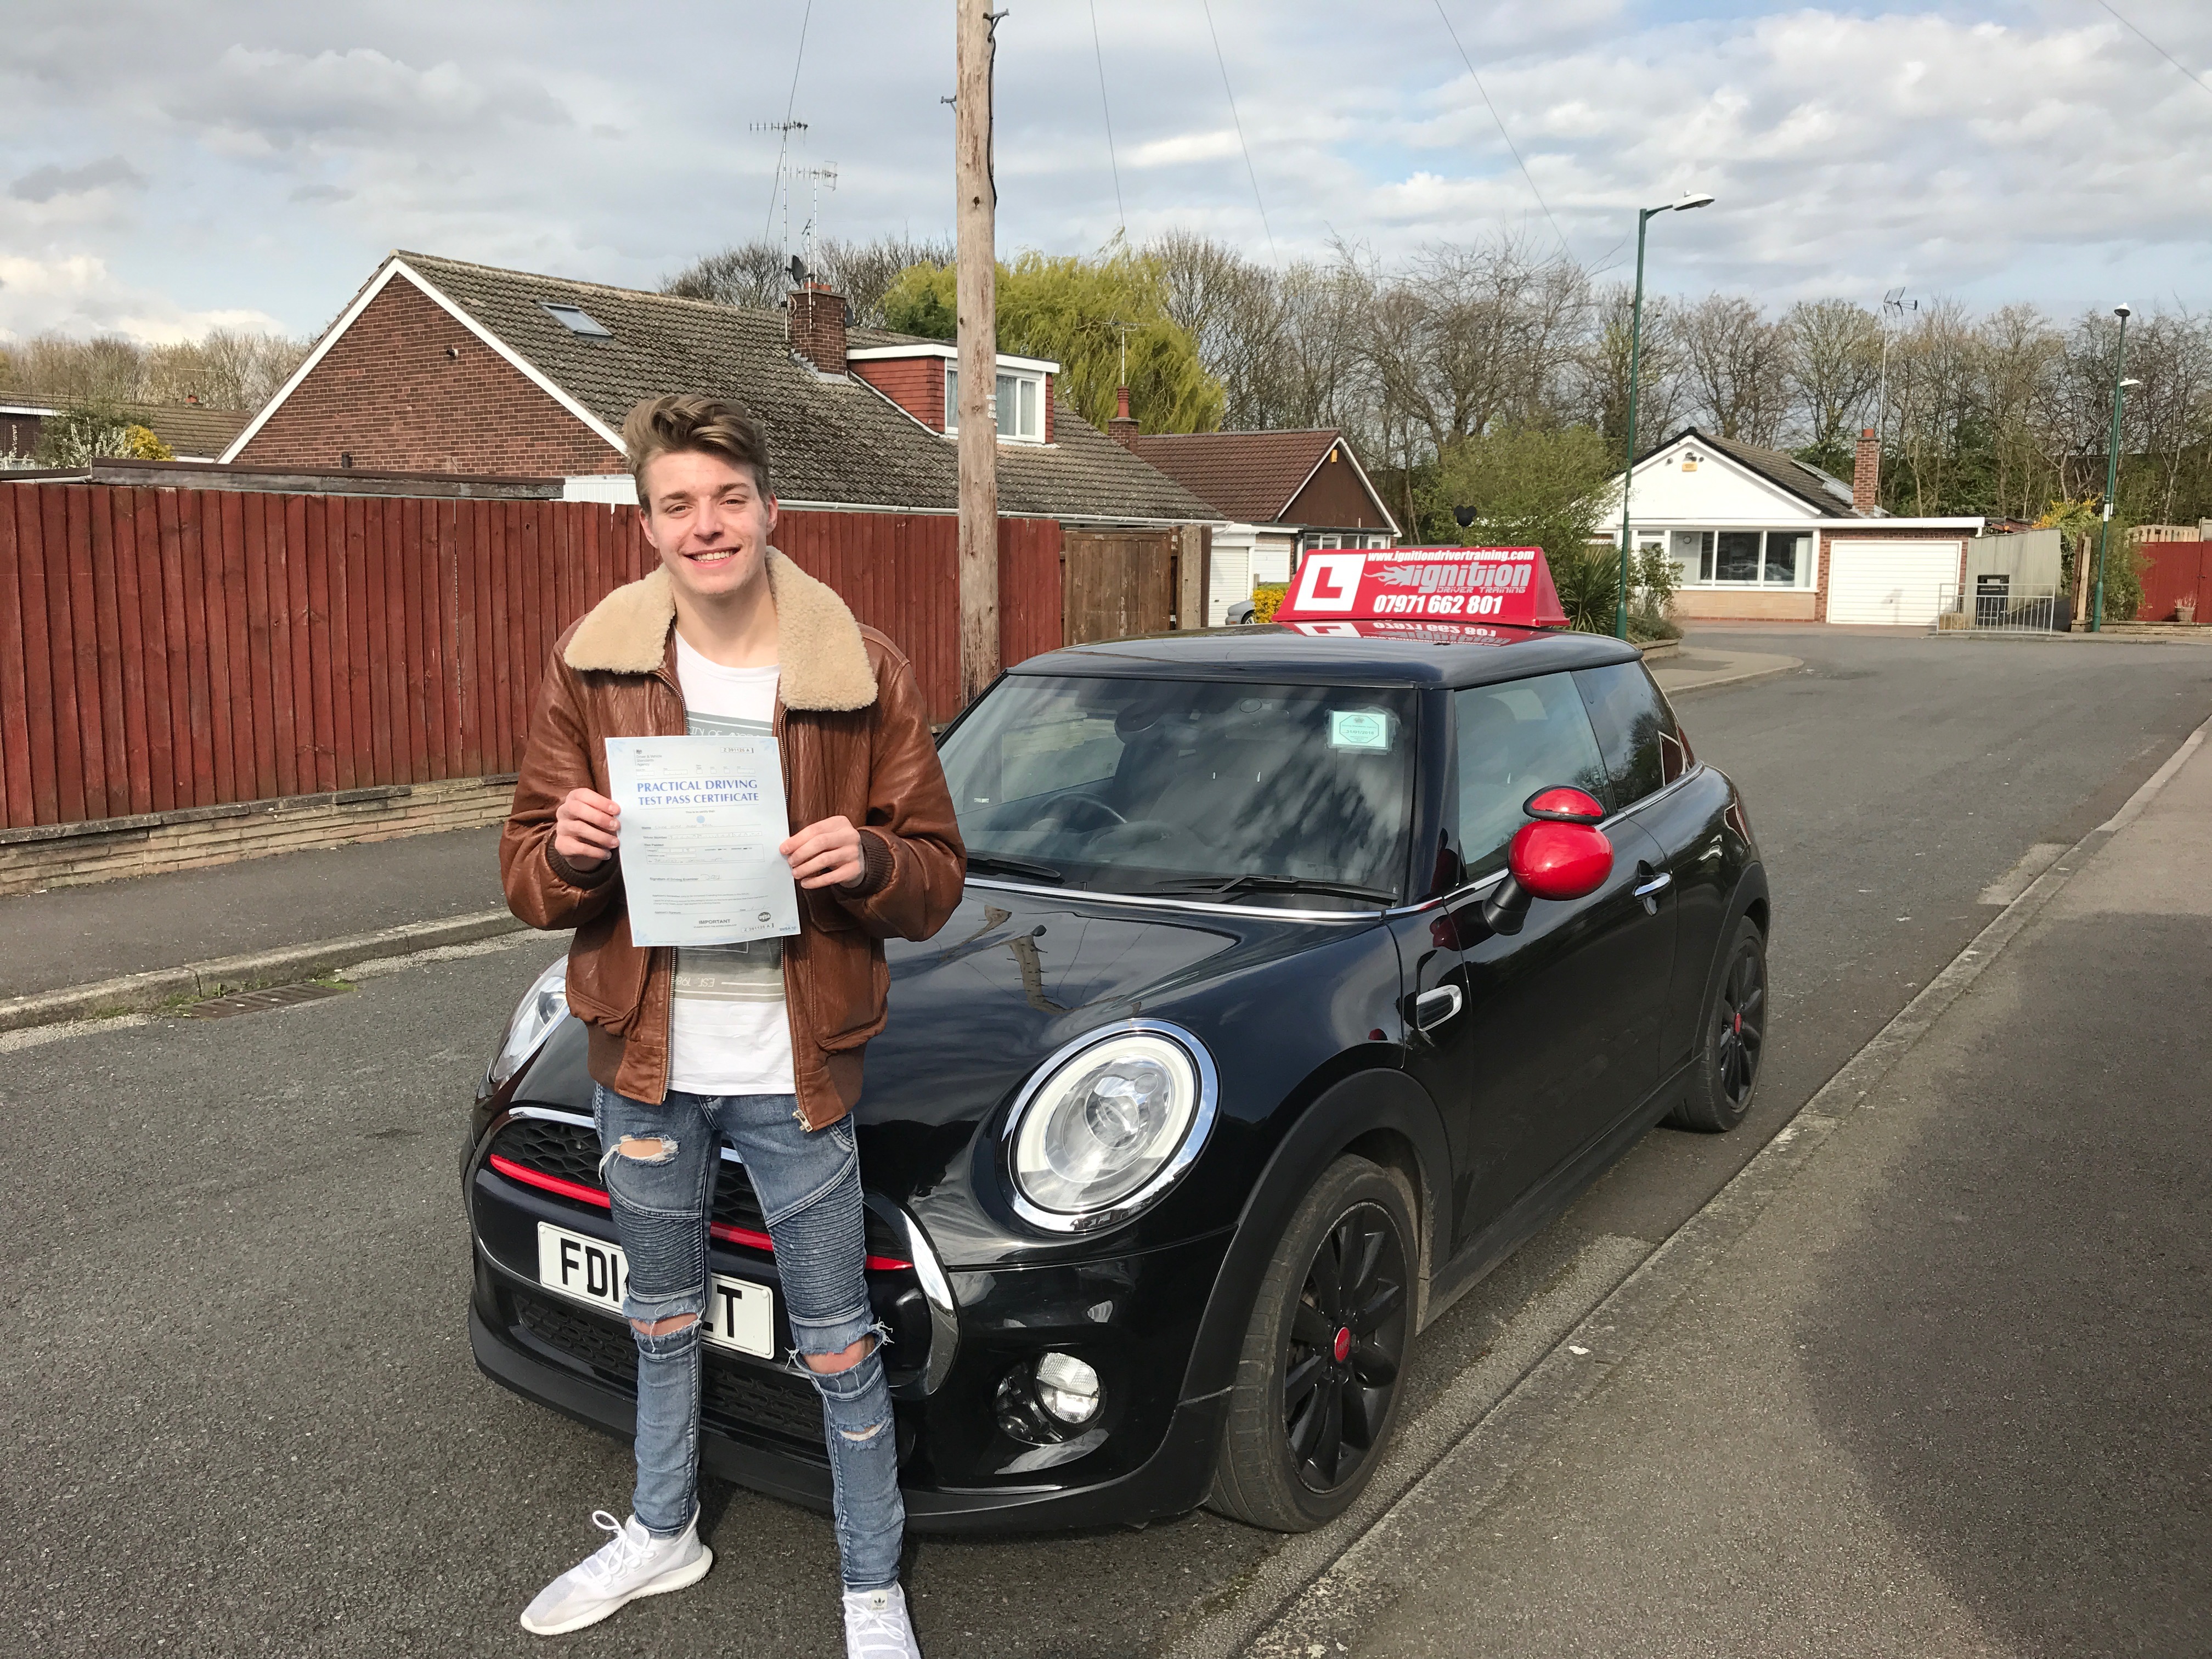 Its a first time pass for Luke!